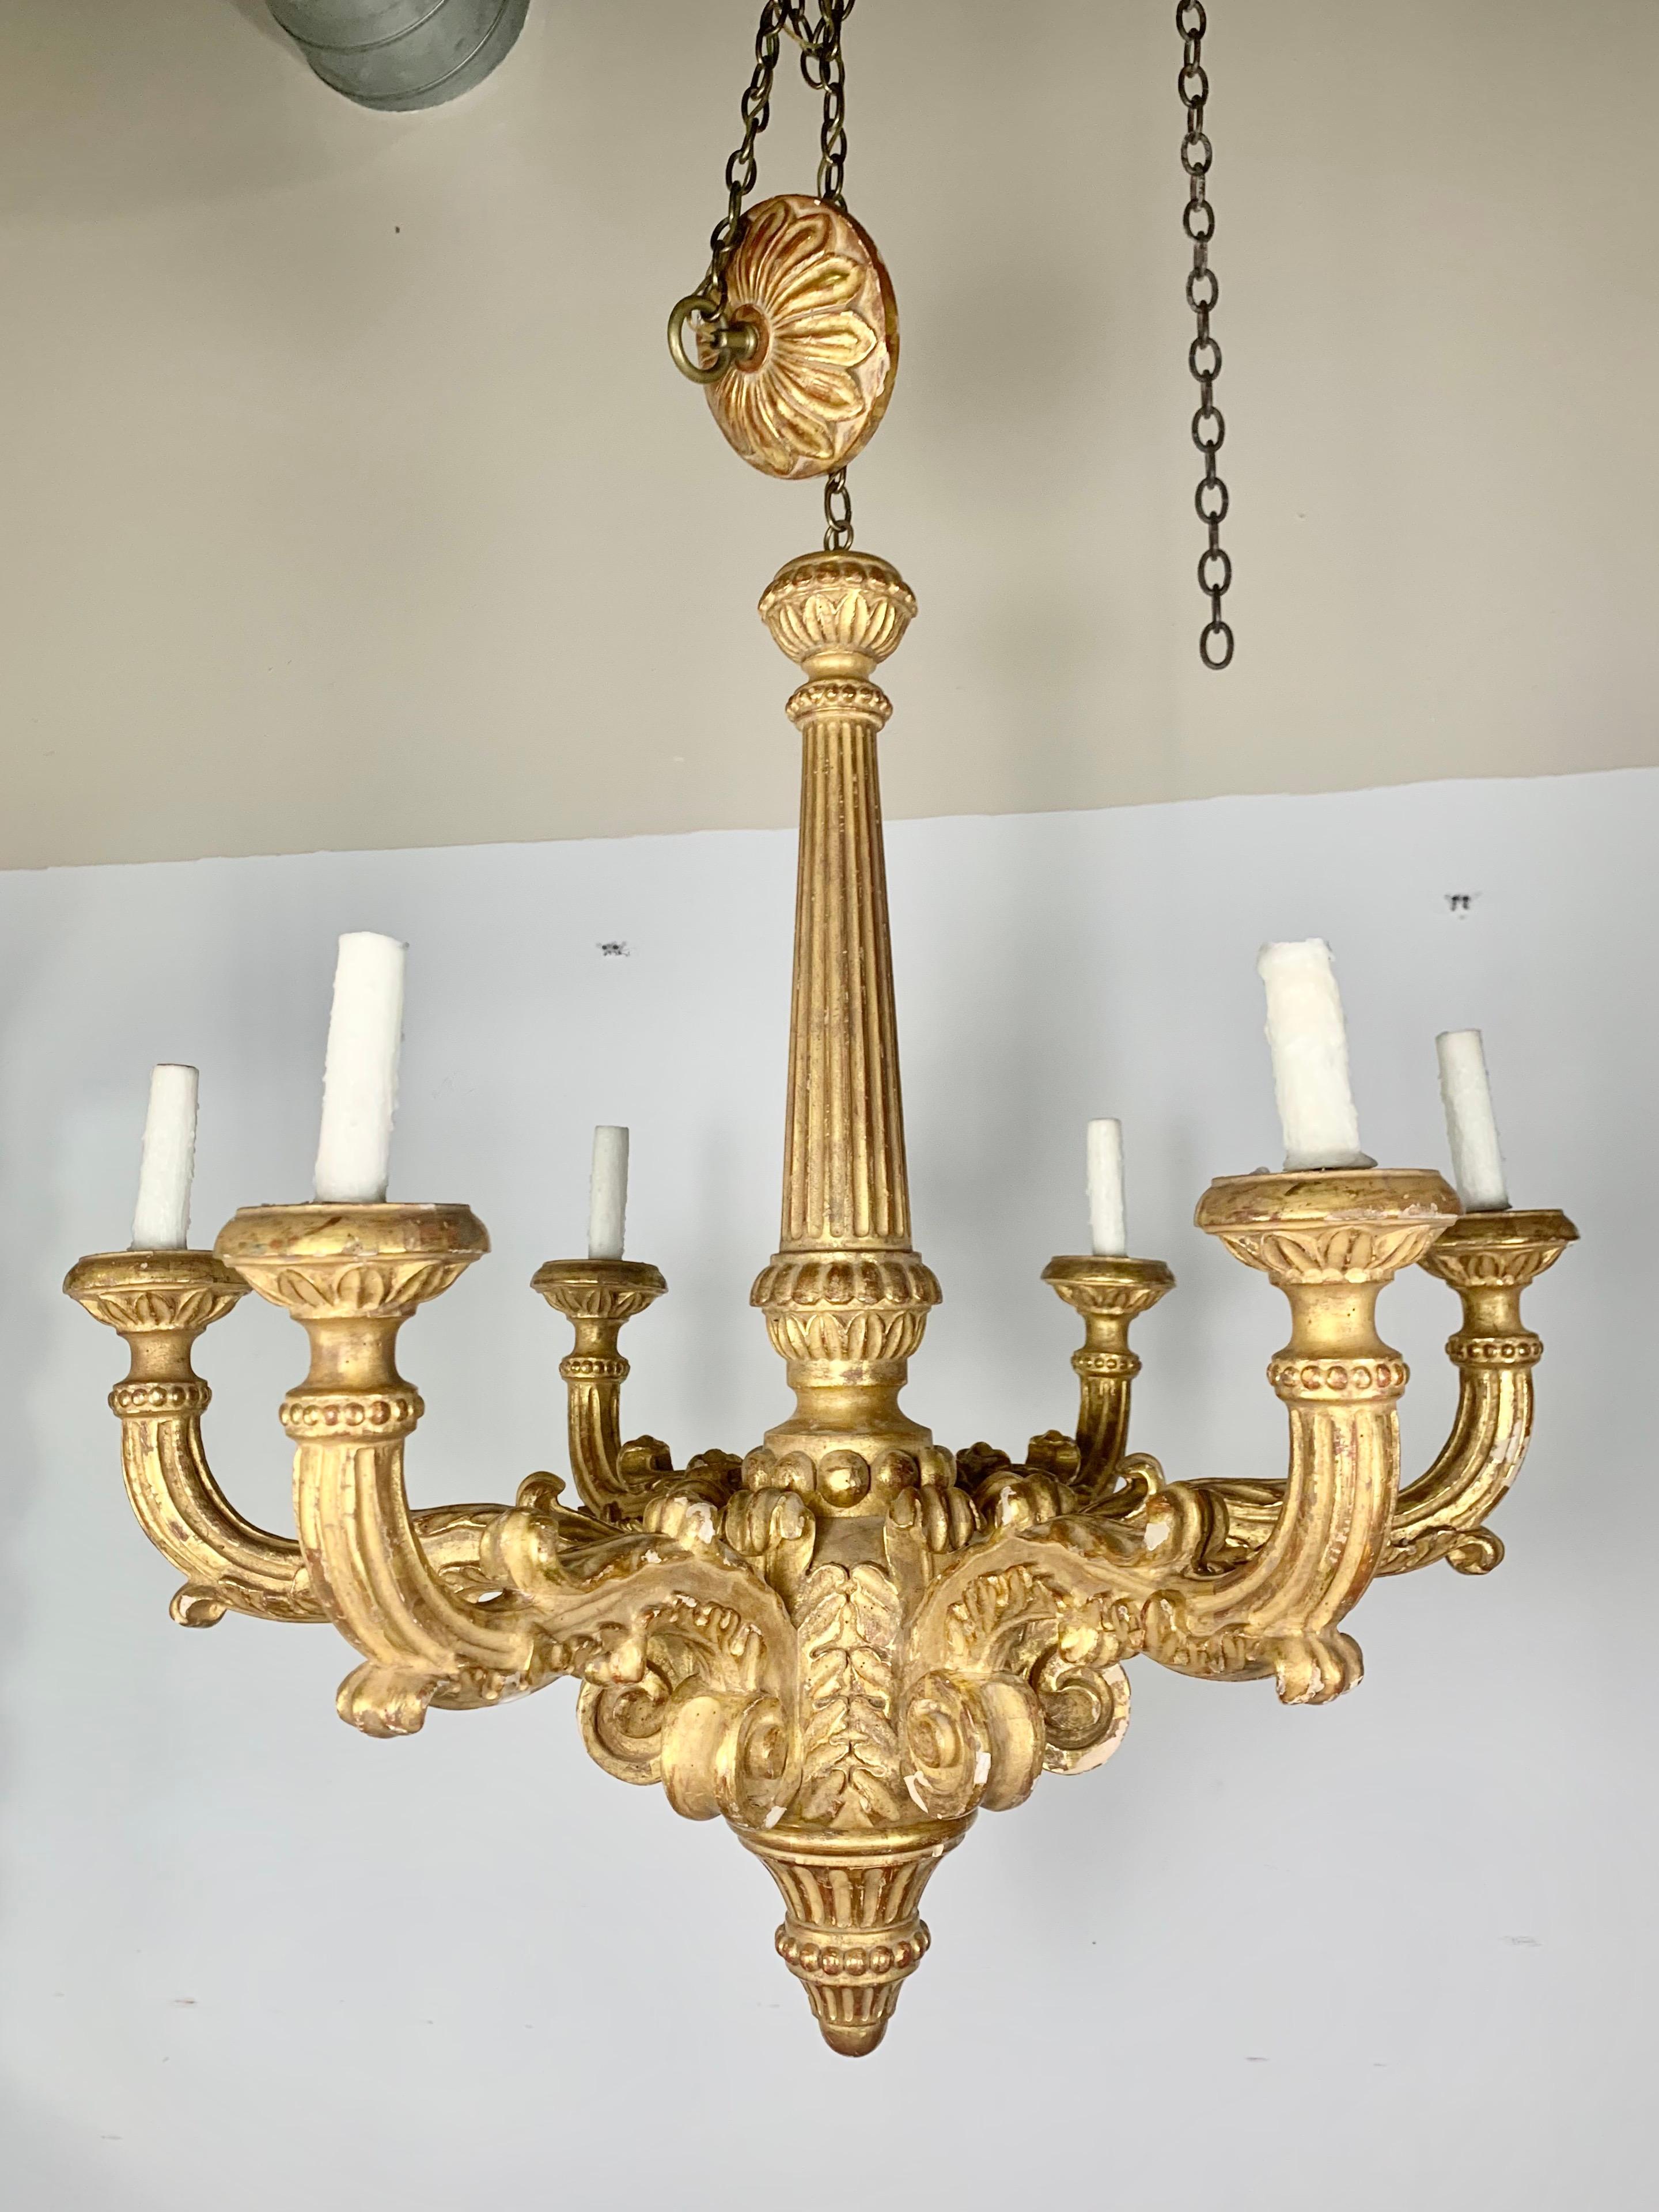 Eight light monumental gilt wood chandelier. The Italian carved wood piece is finished in a gold leaf throughout. The fixture is newly rewired and ready to intall with chain and original canopy.